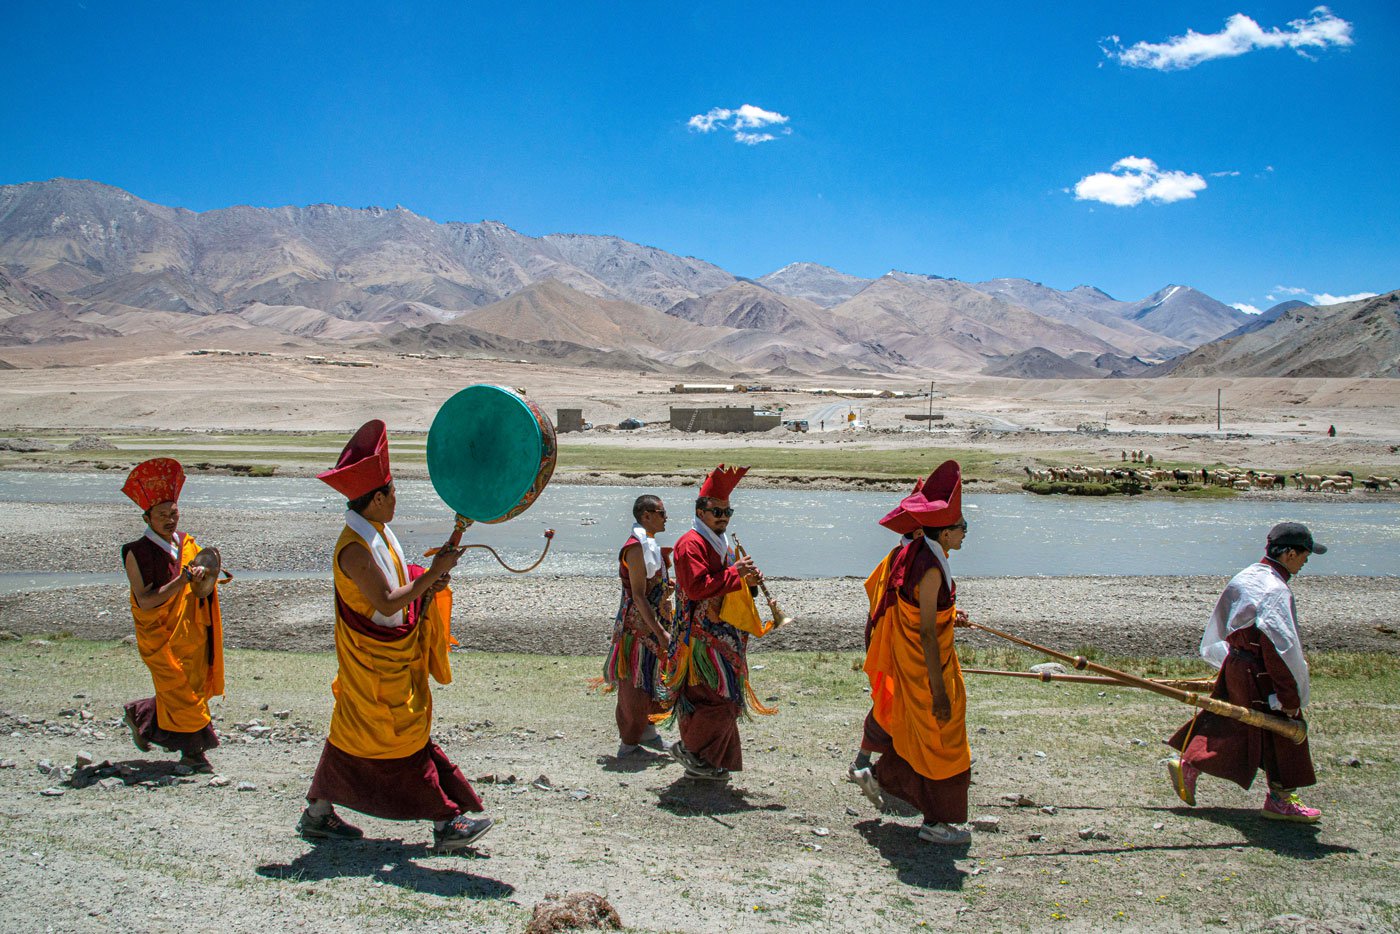 The lama’s route for this procession includes circling the Hanle monastery along the Hanle river